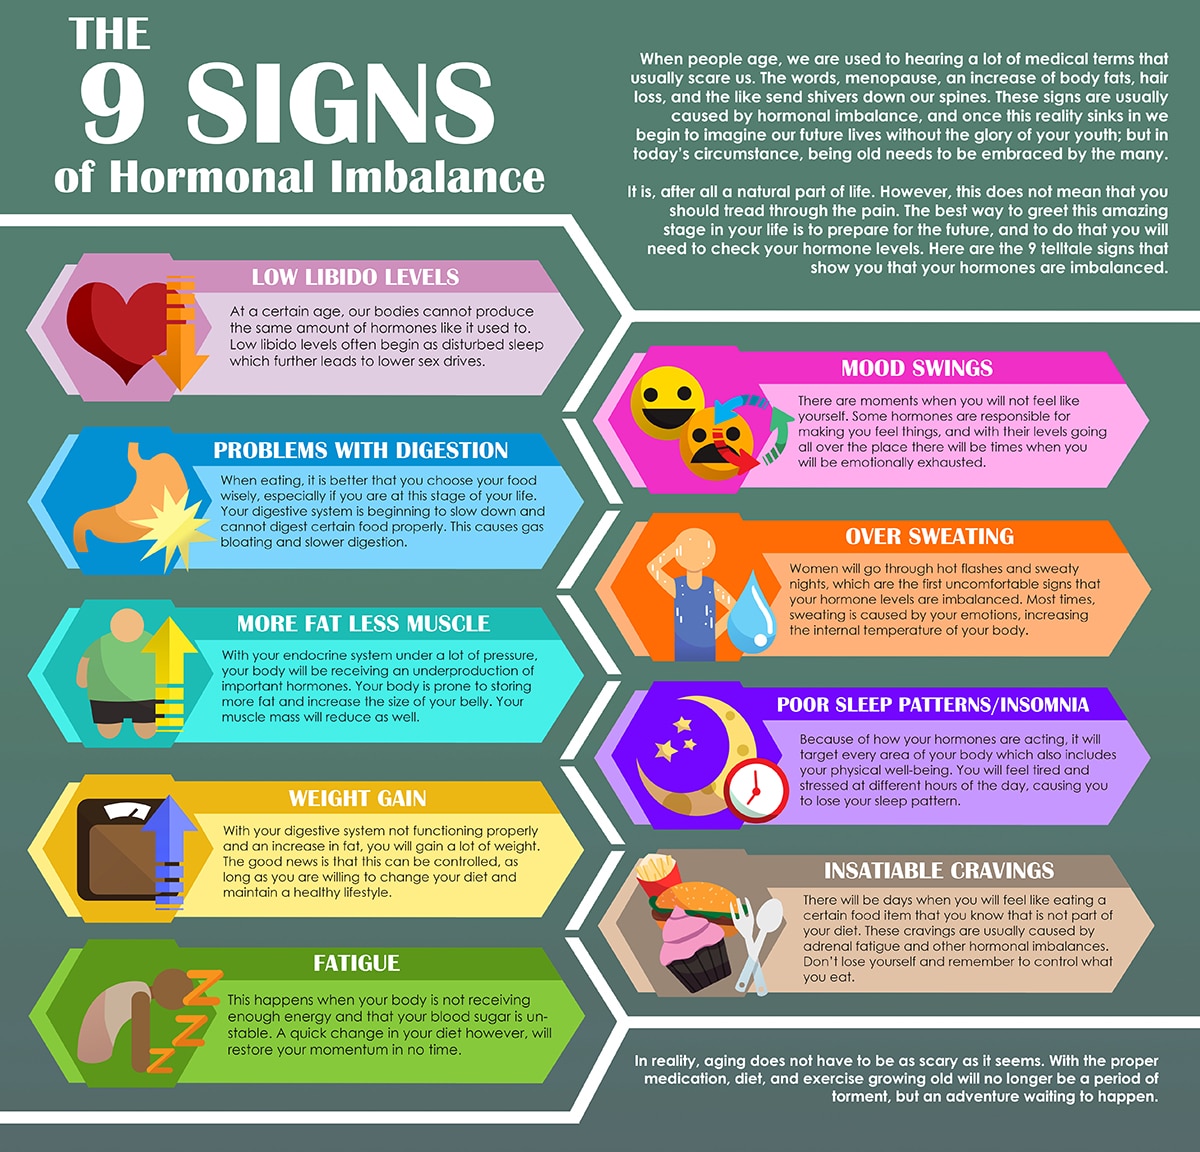 The 9 Signs of Hormonal Imbalance